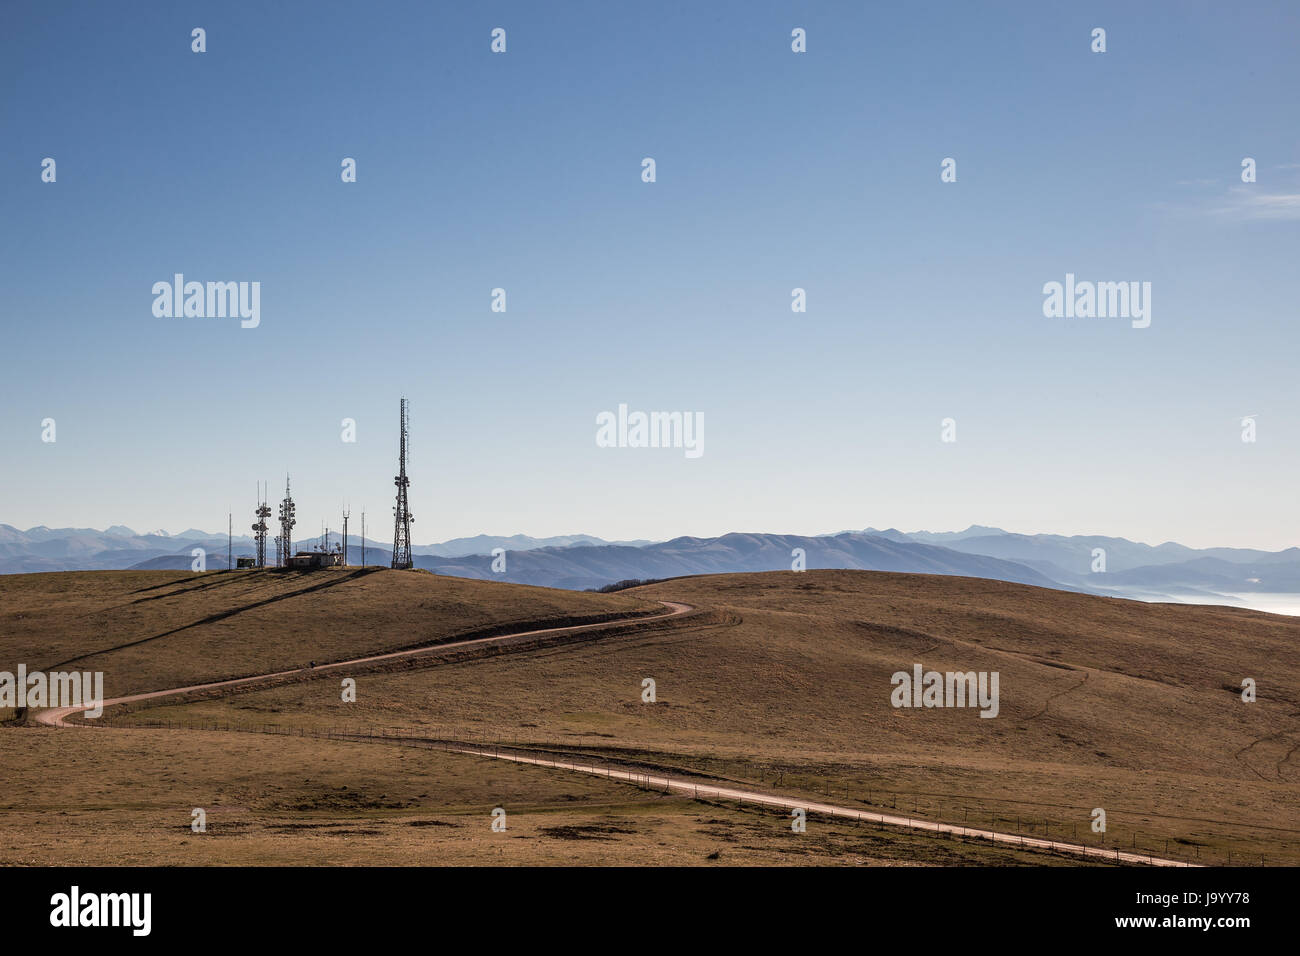 A curvy road towards some antennas on a top of mountain, under a blue, empty sky Stock Photo